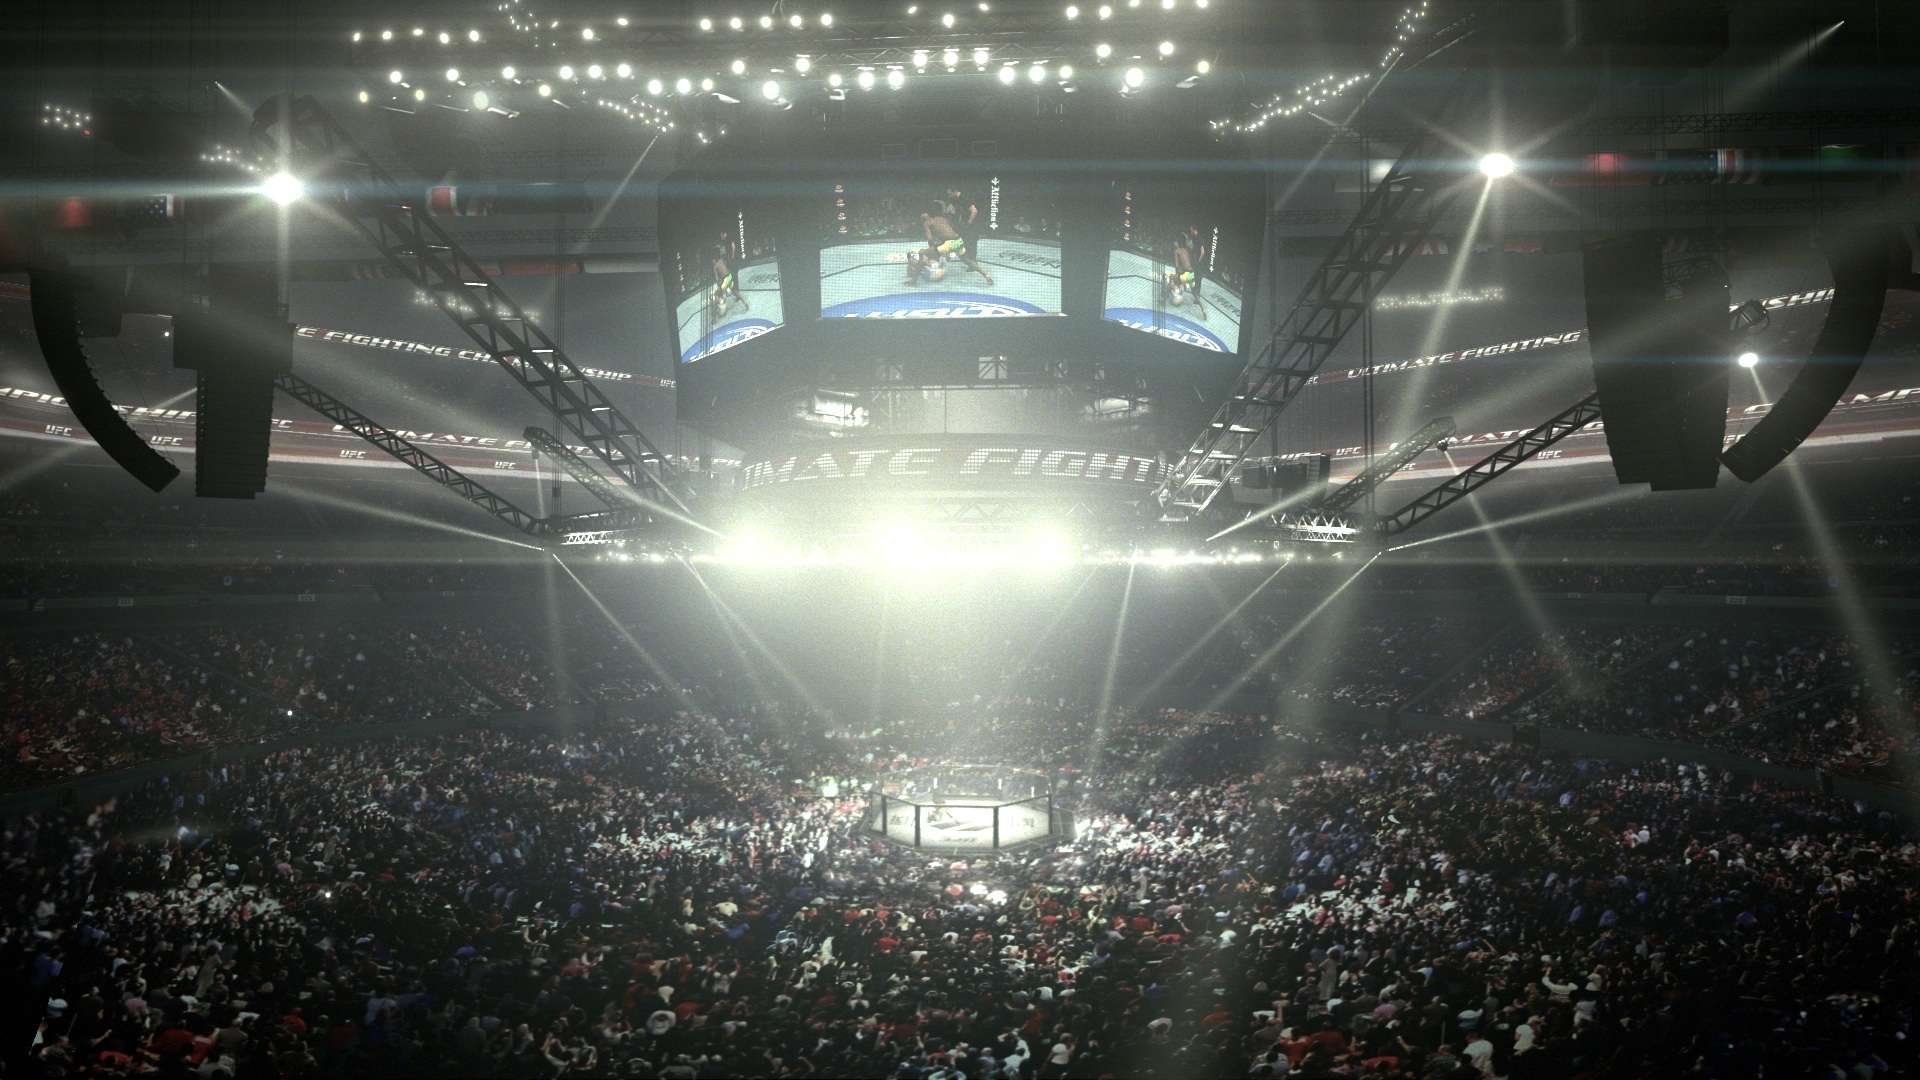 UFC Wallpaper and Photo, 1920x1080